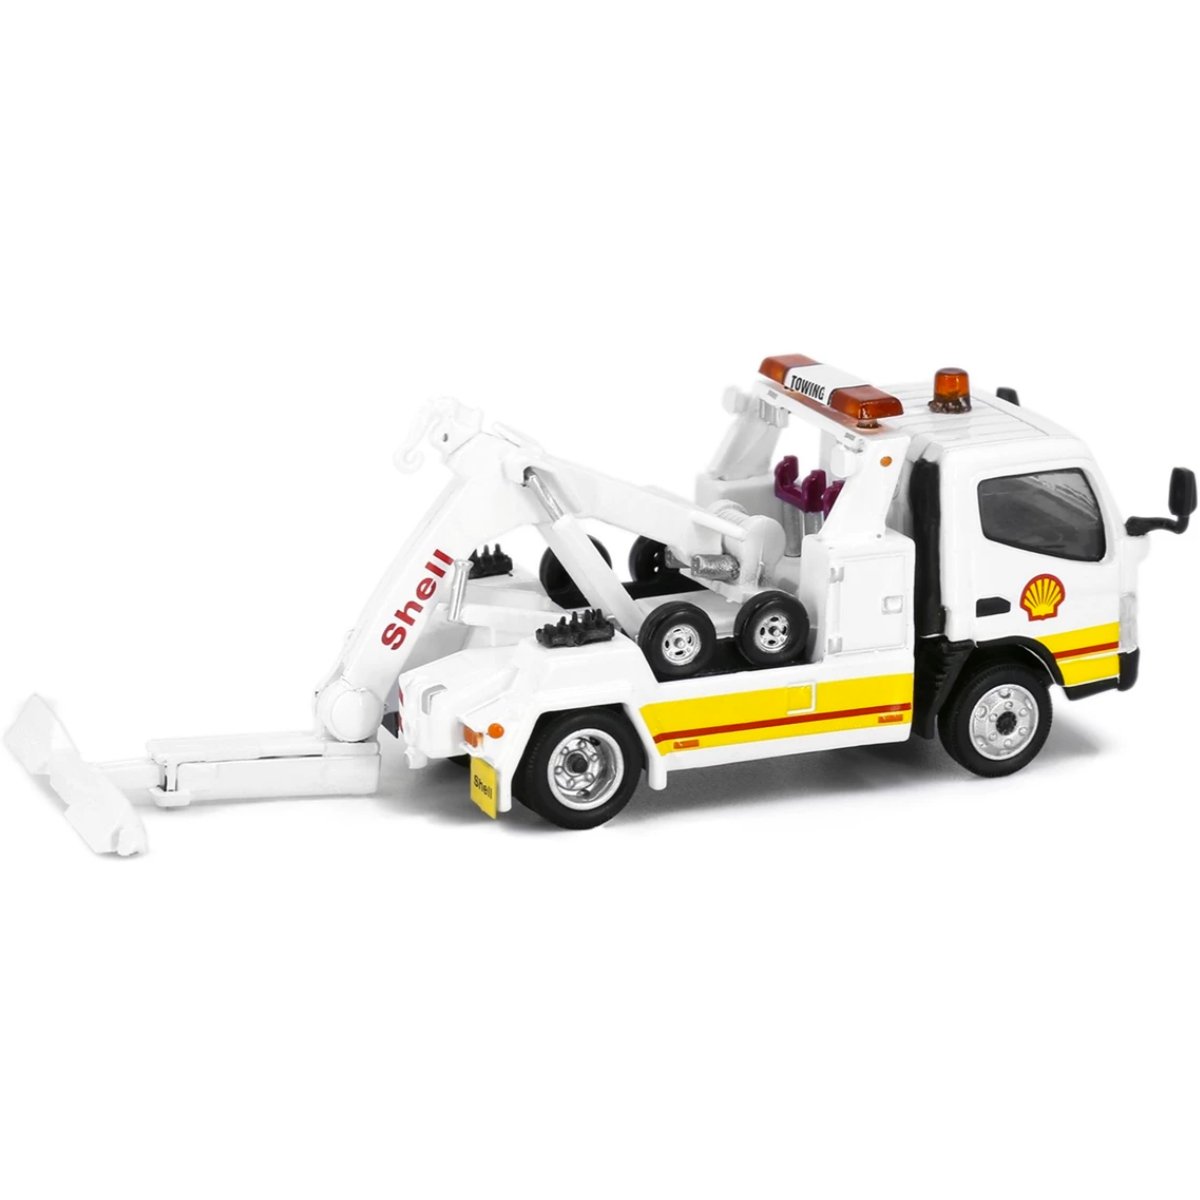 Tiny Models Mitsubishi Fuso Canter Shell Tow Truck (1:76 Scale) - Phillips Hobbies